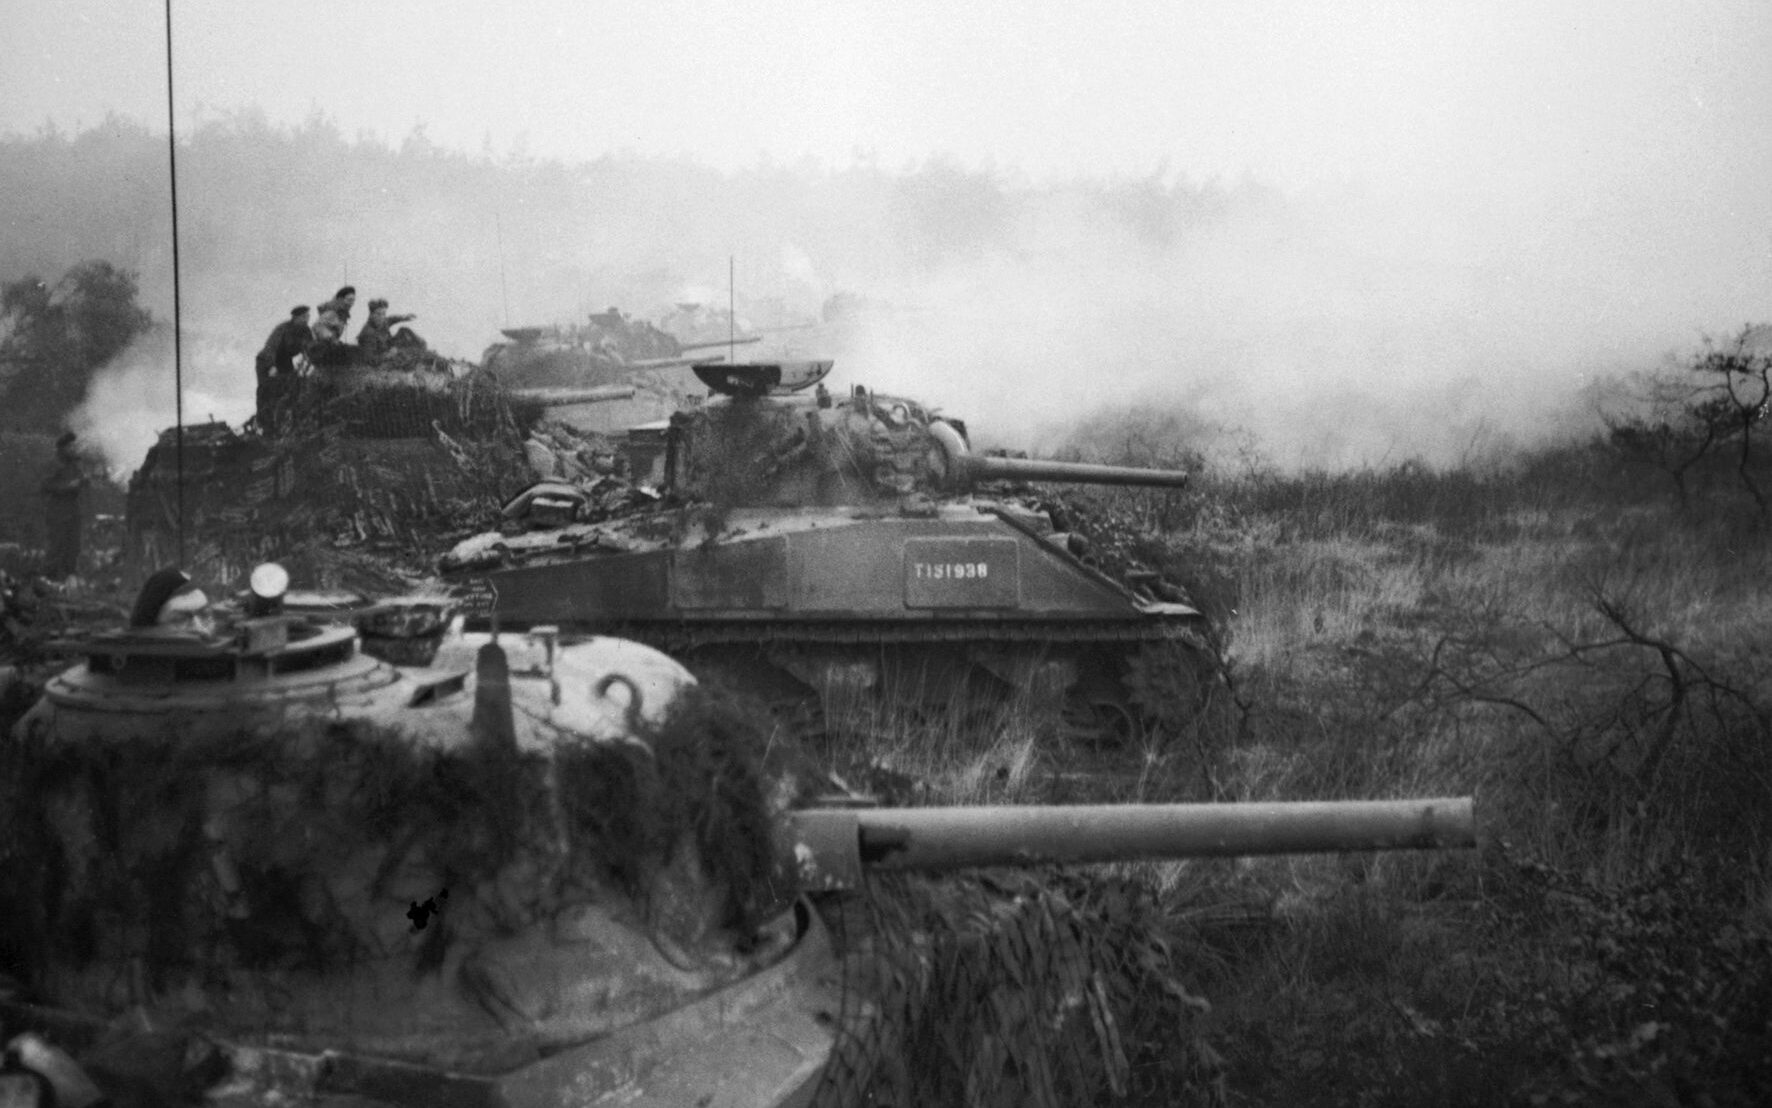 A phalanx of M4 Sherman medium tanks assembles for the initial push of Operation Veritable, an Allied offensive to clear the area between the Rhine and Mass Rivers, on February 8, 1945.